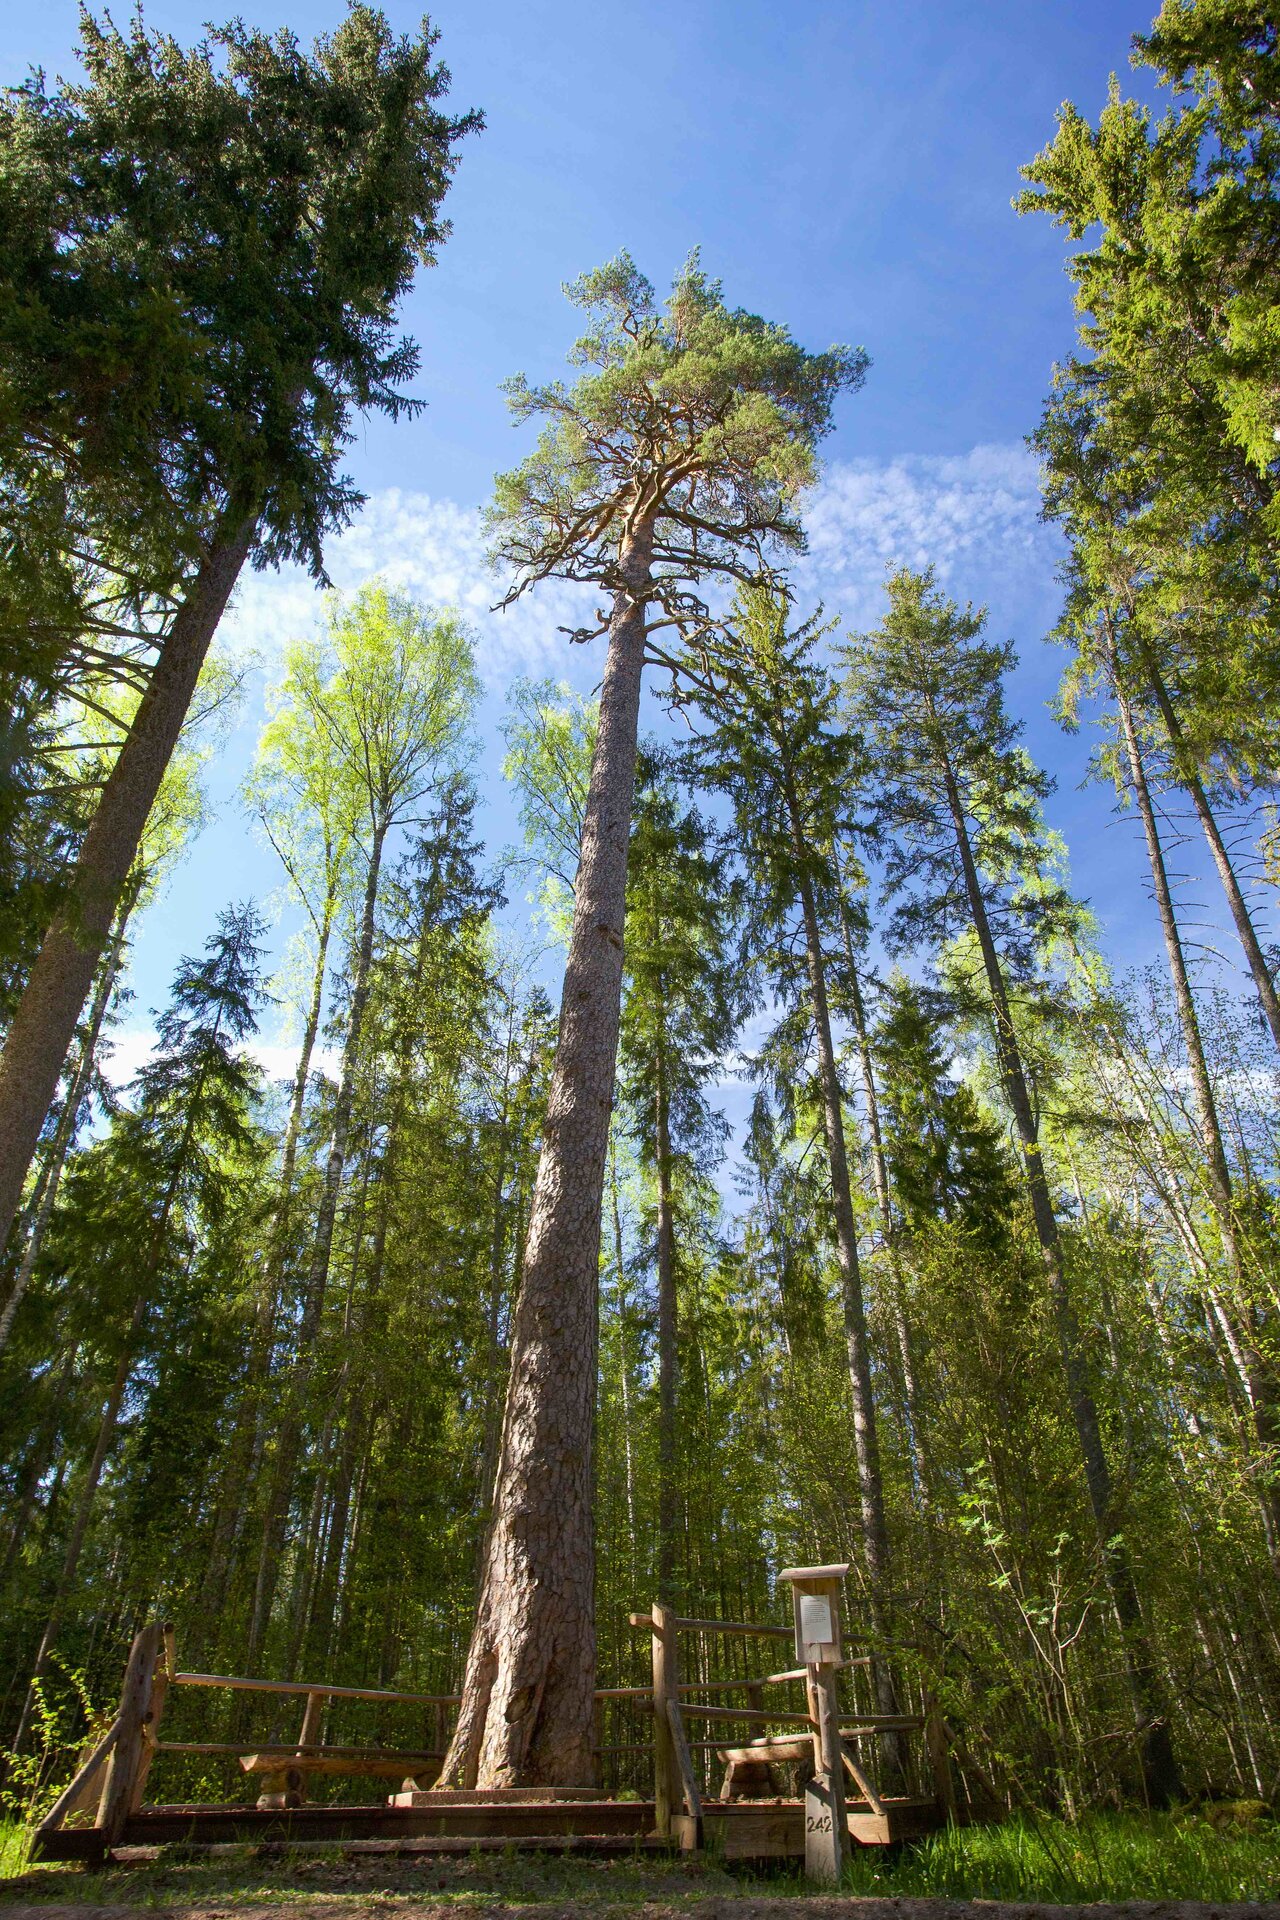 King's pine is one of the oldest and biggest trees in Estonia